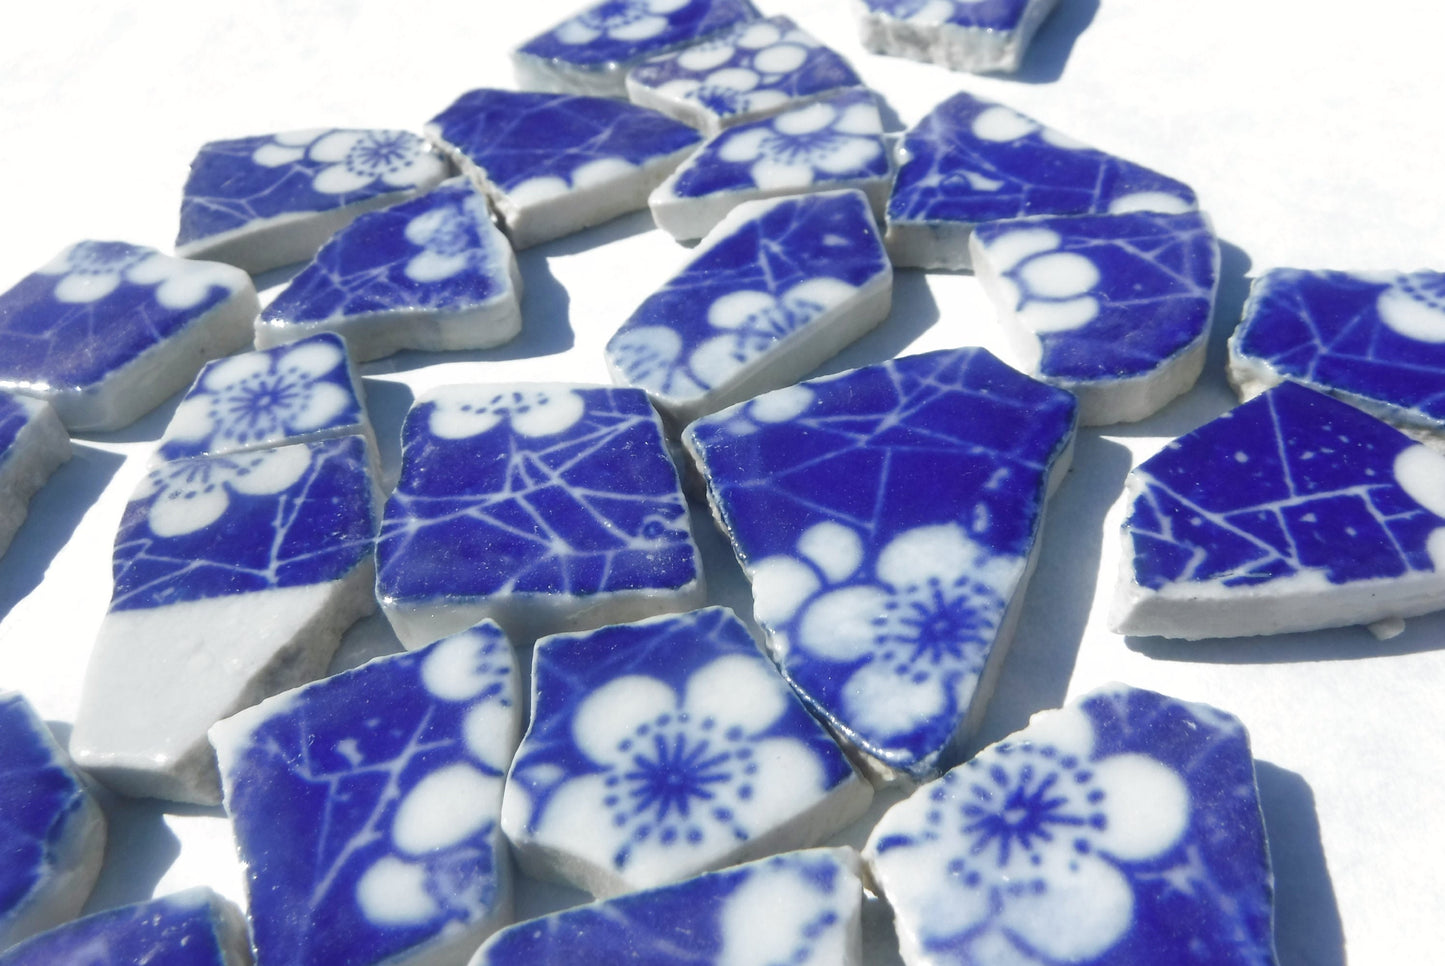 White Flowers on Deep Blue Chunky Floral Mosaic Tiles - Half Pound